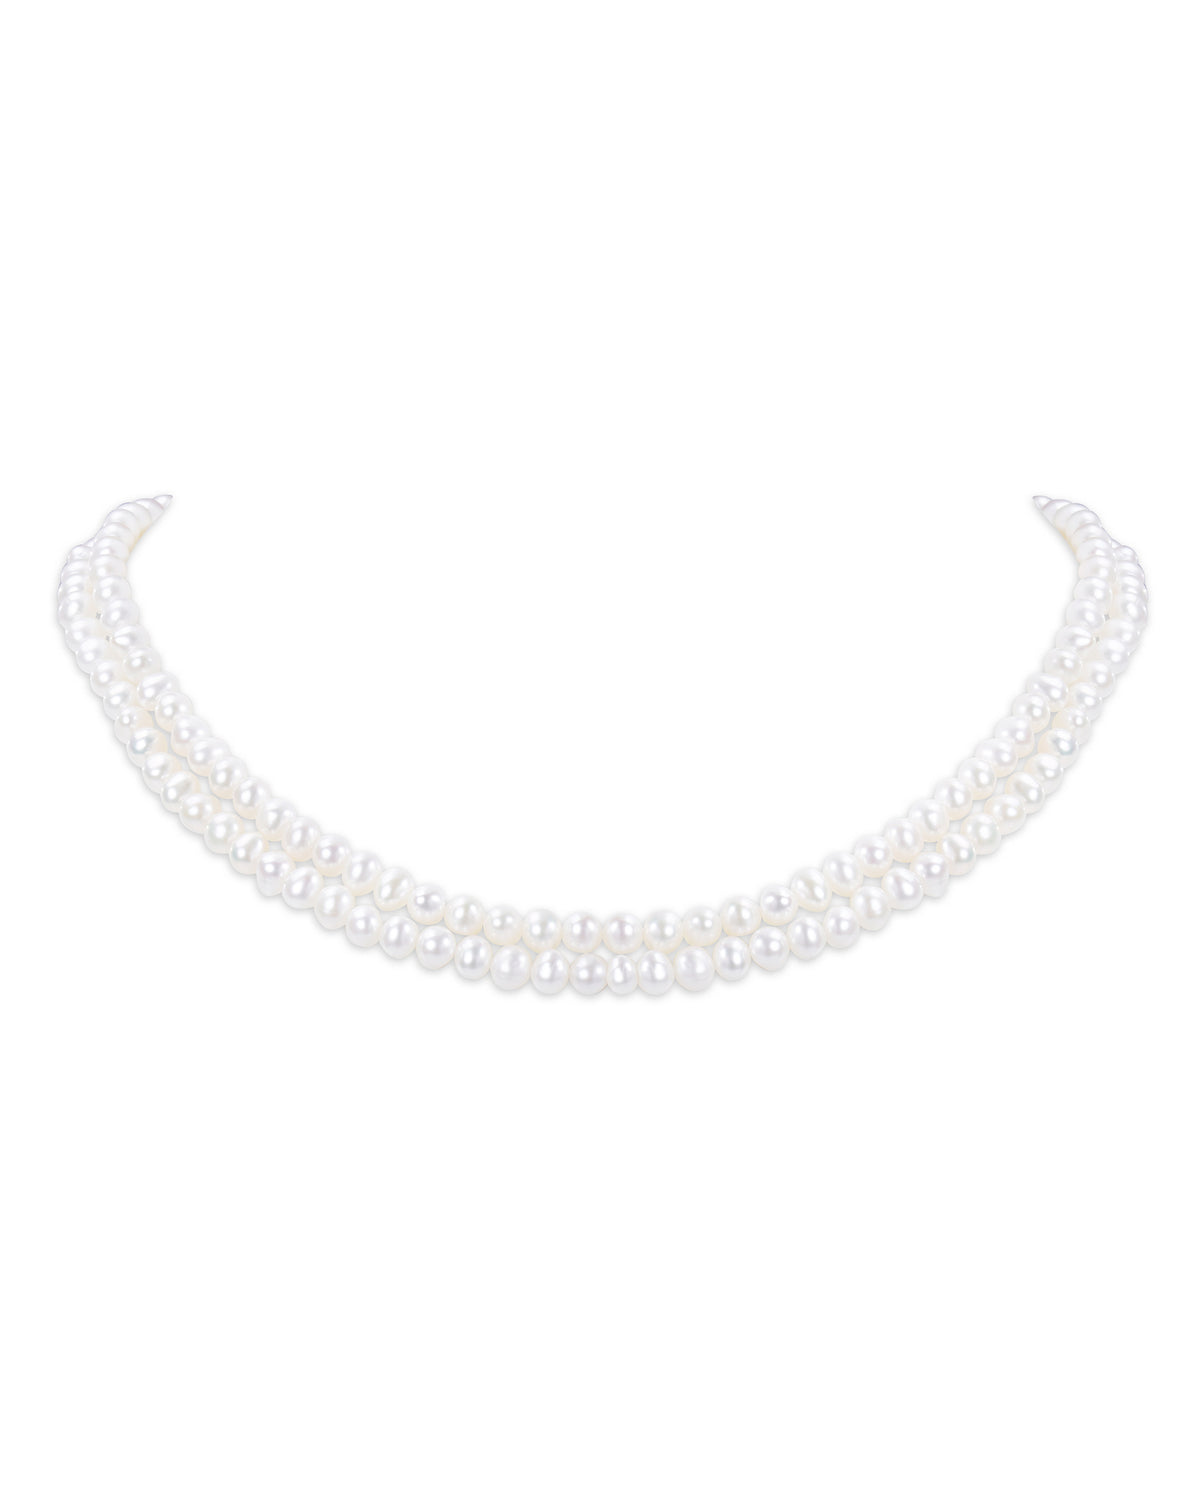 'Freedom' 5.0-6.0mm Double Strand Pearl Necklace